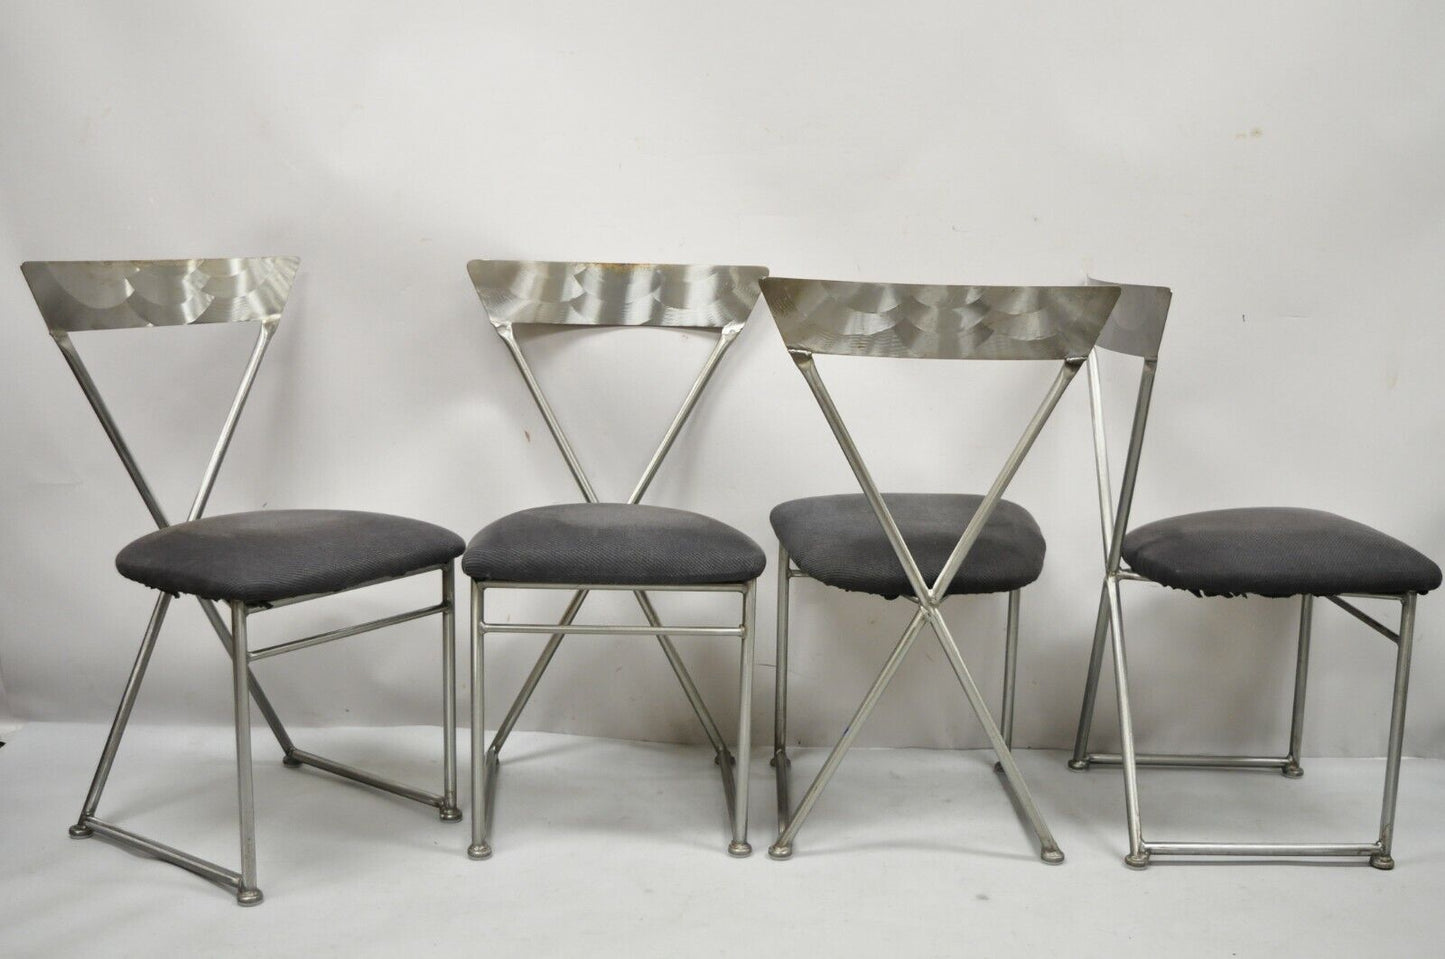 Shaver Howard Italian Modernist Brushed Steel Metal Dining Chairs - Set of 4